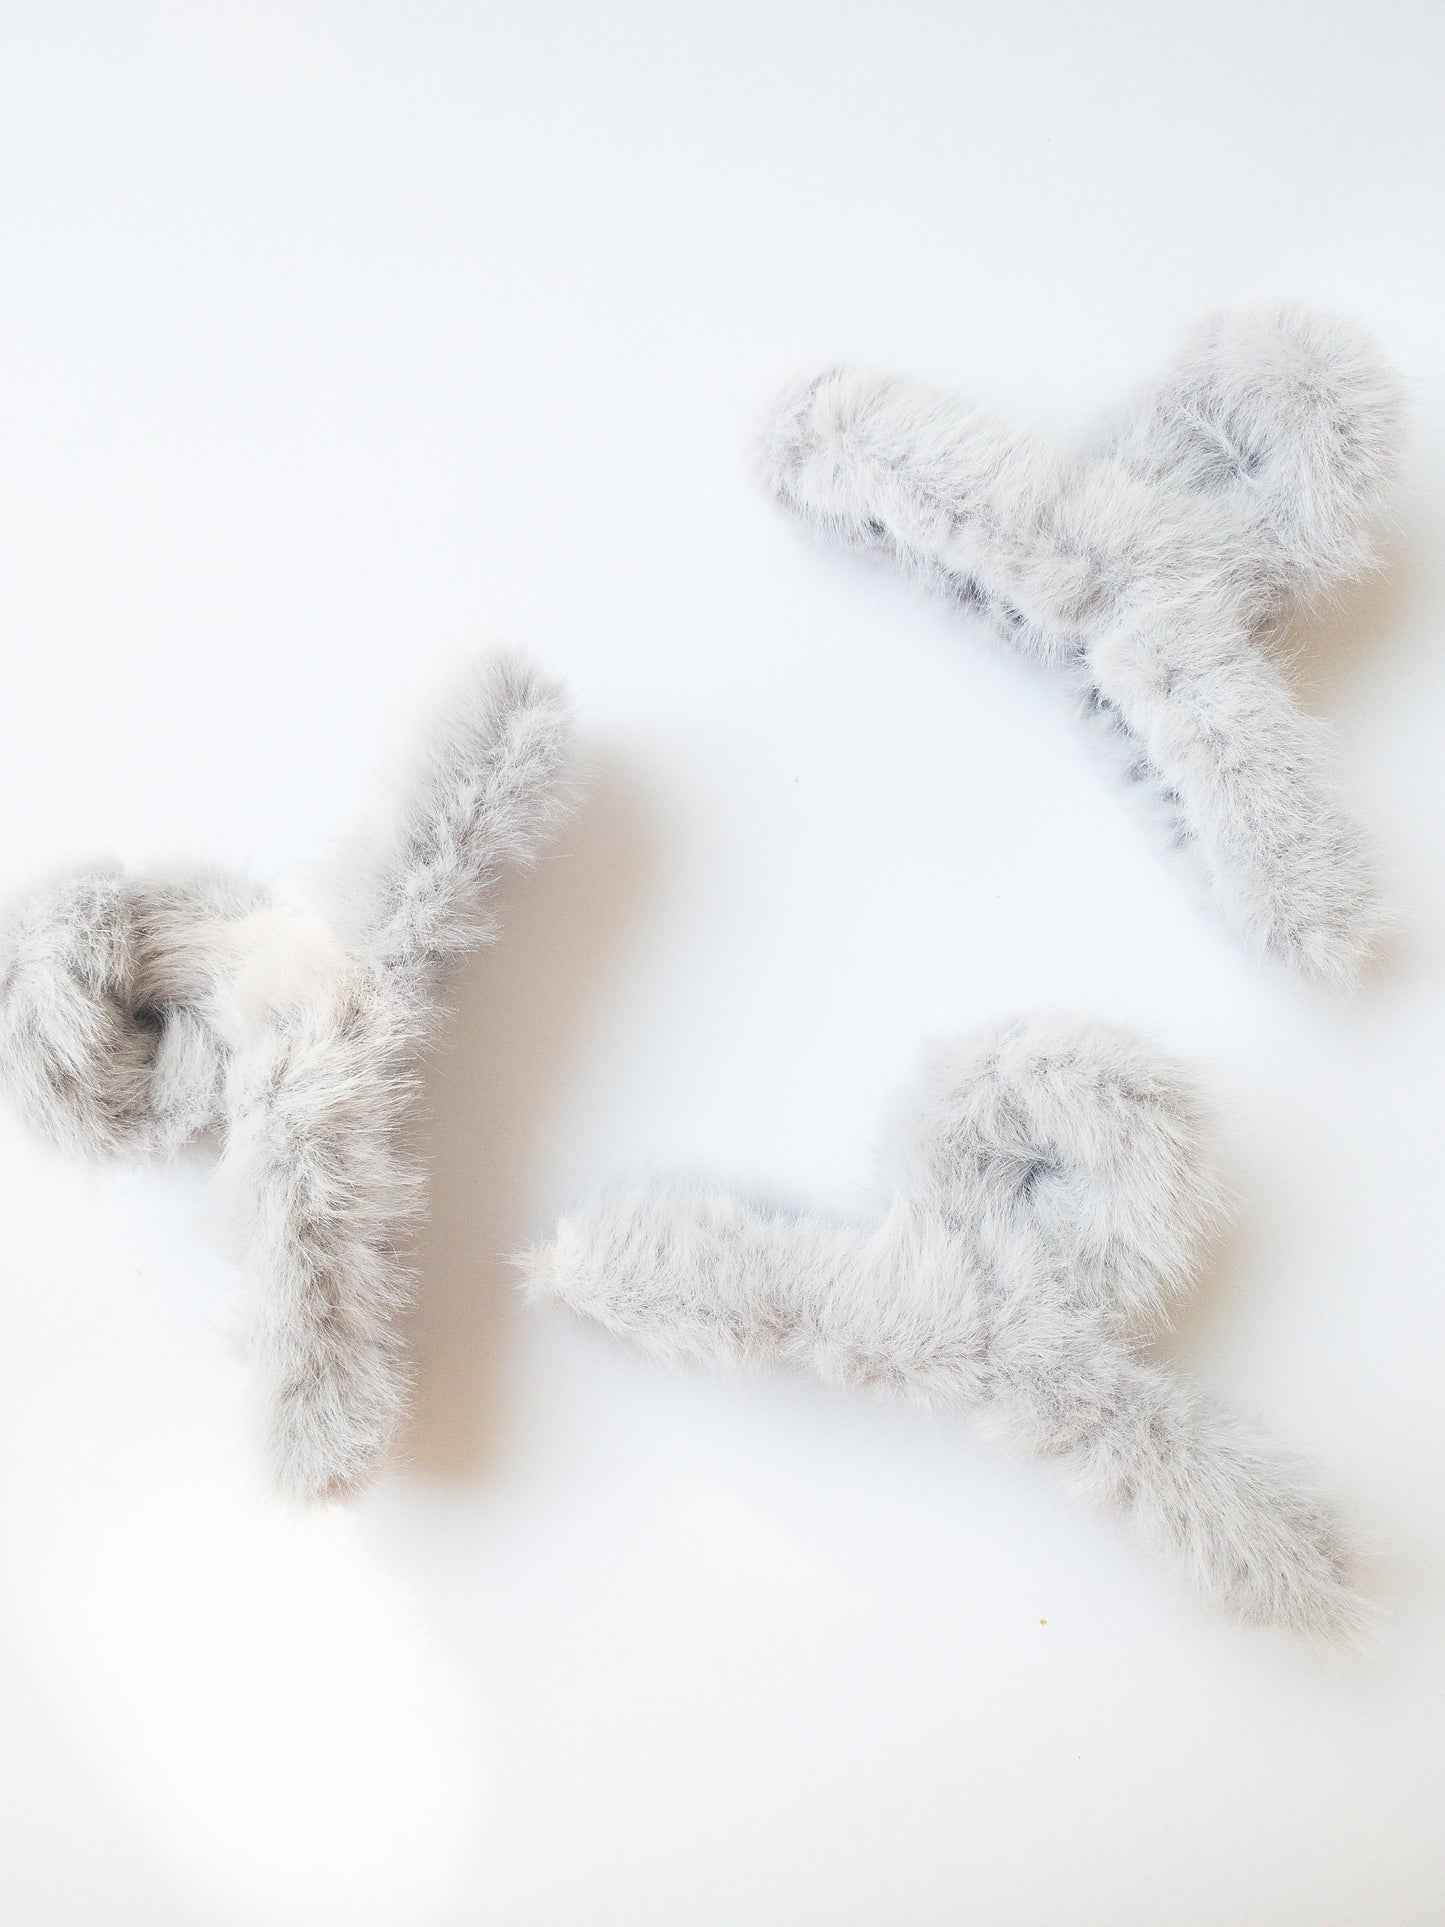 Just pure softness in a hair claw. Each transparent loop hair claw is wrapped in a furry soft light blue gray fabric for those easy to grab, messy hair days.